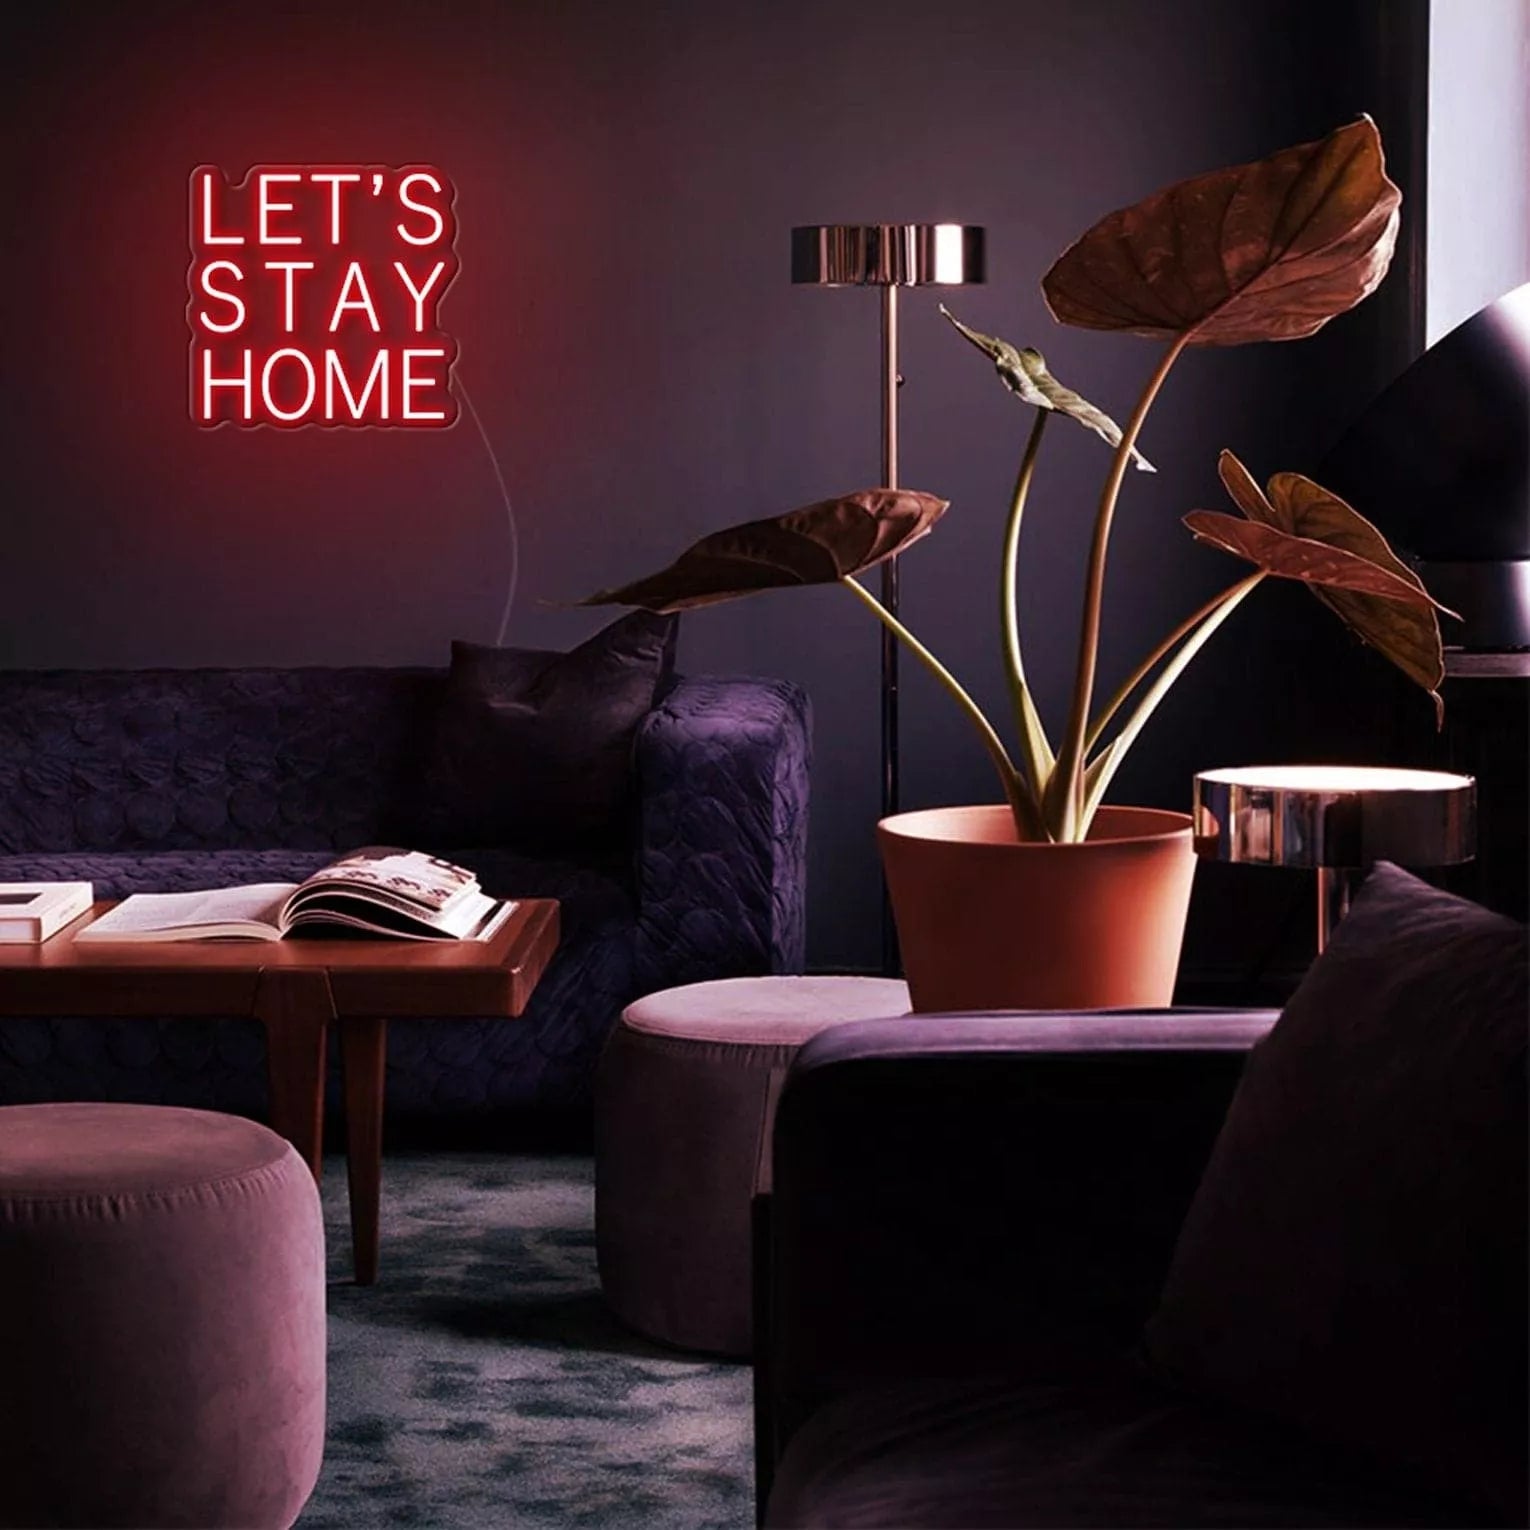 "LET'S STAY HOME" Neon Sign - NeonHub